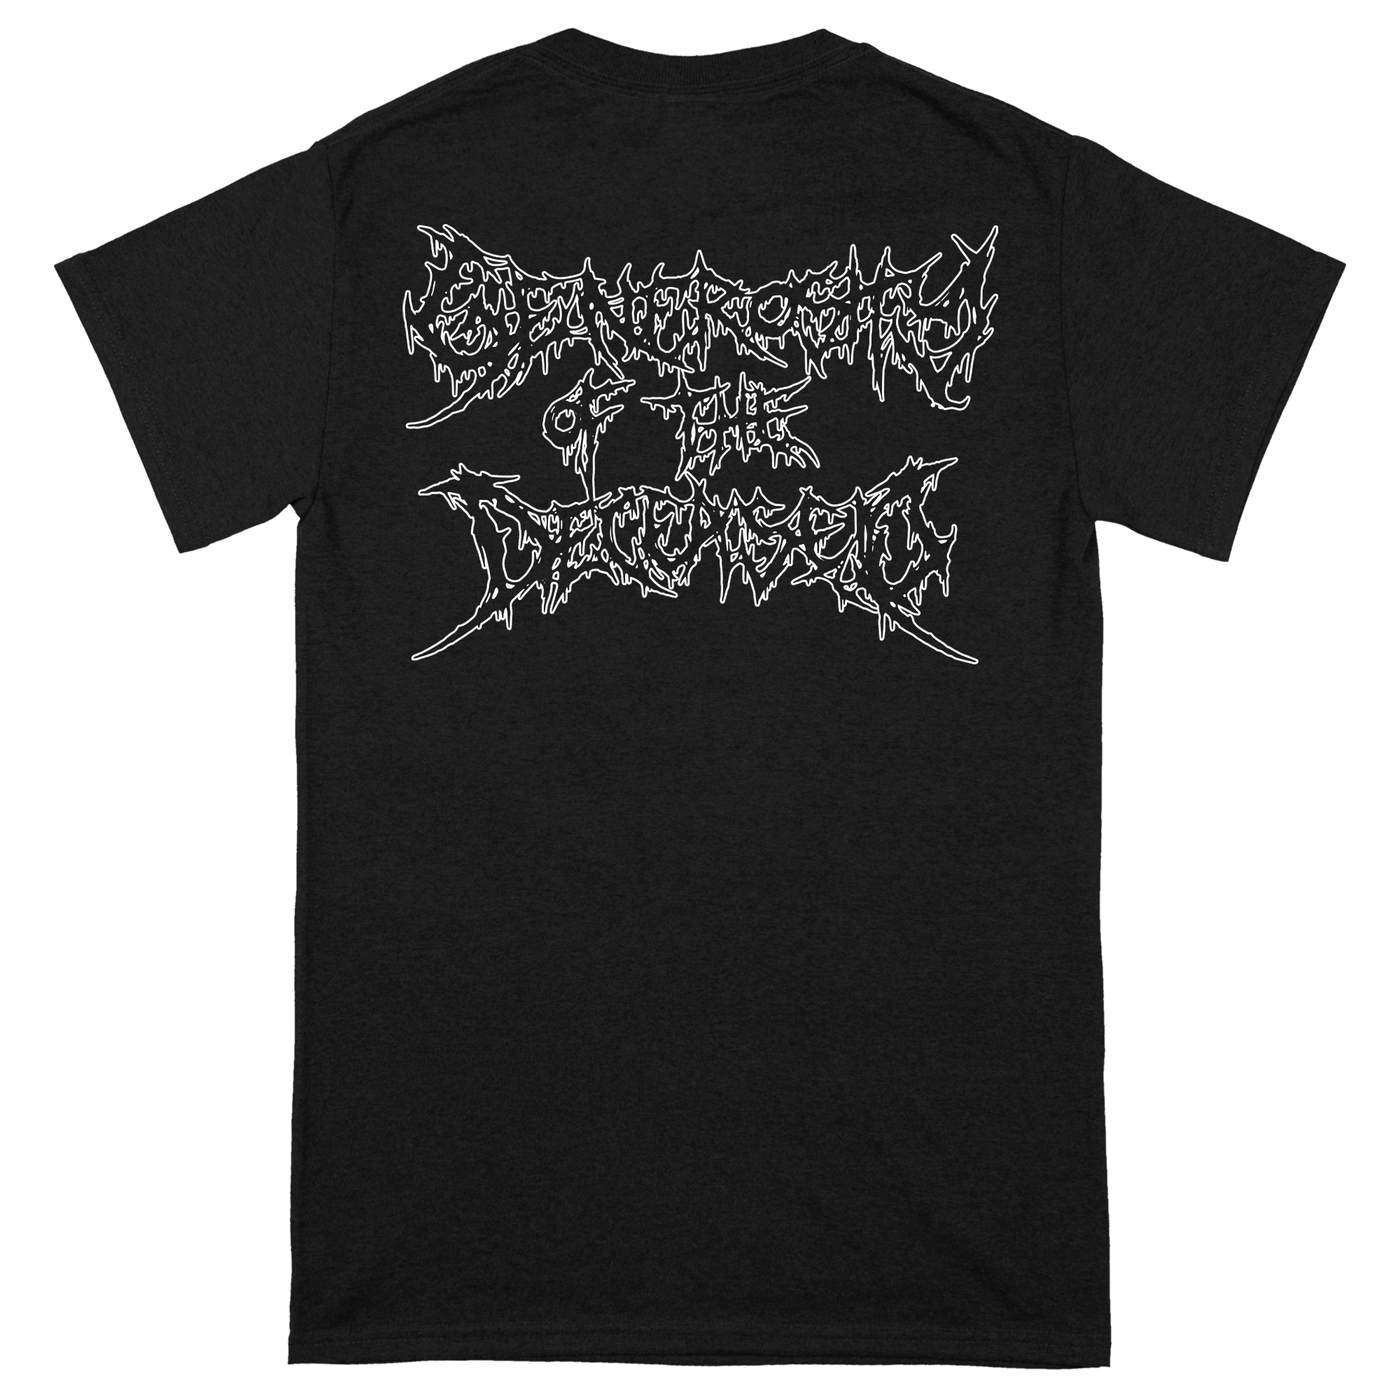 Defeated Sanity 'Generosity Of The Dead' T-Shirt